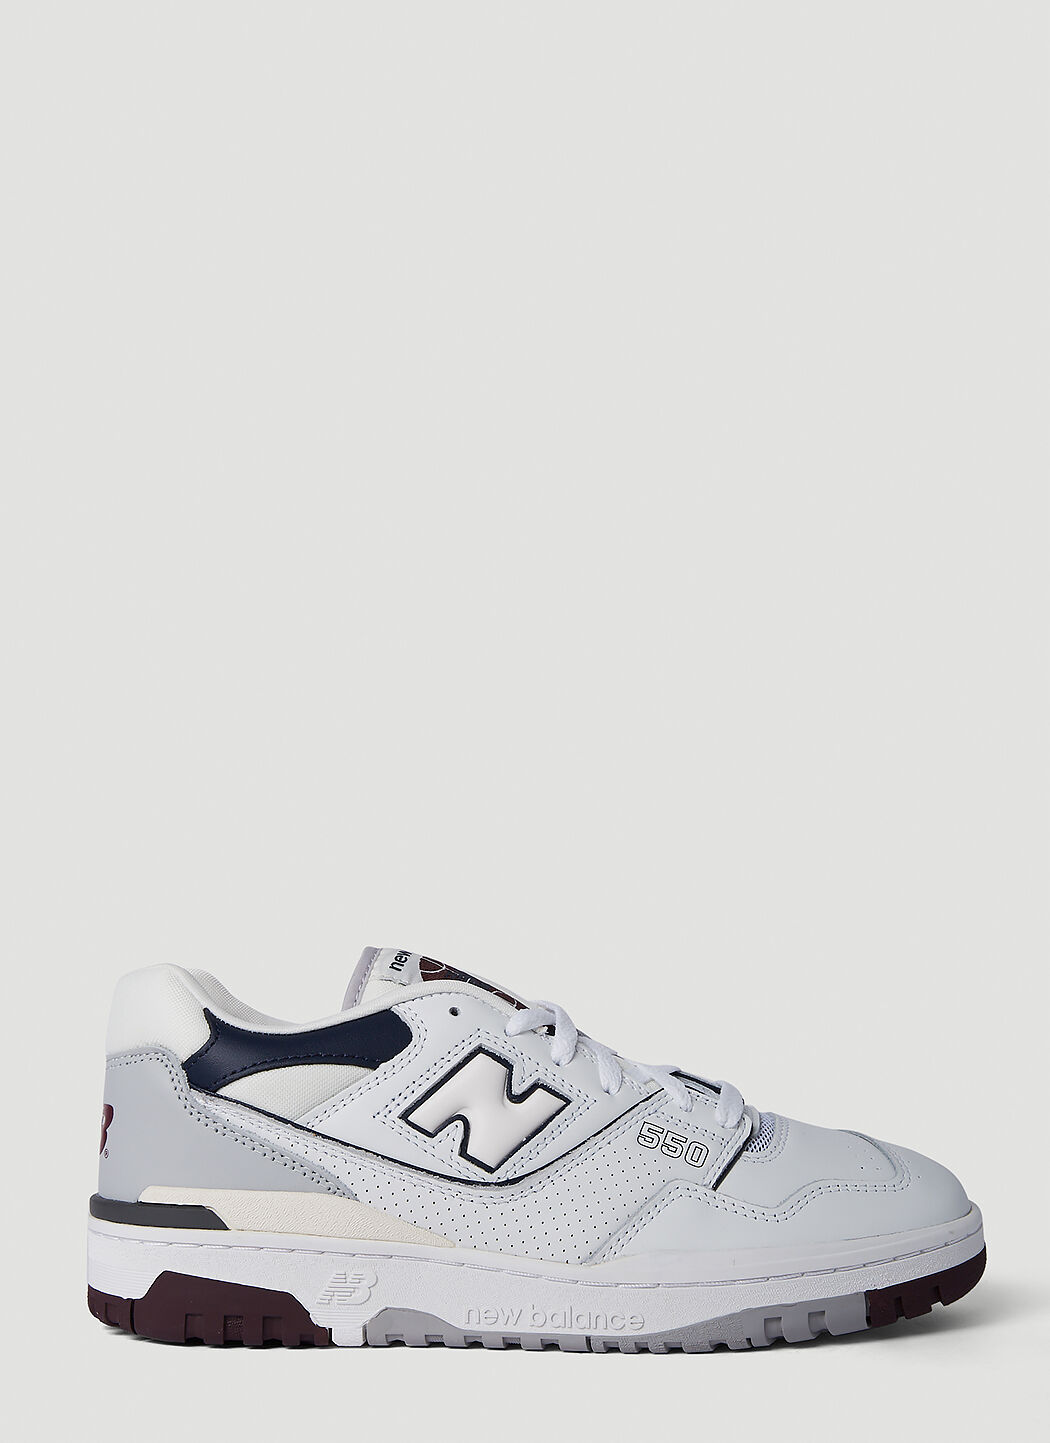 New Balance 550 Sneakers Grey new0254004